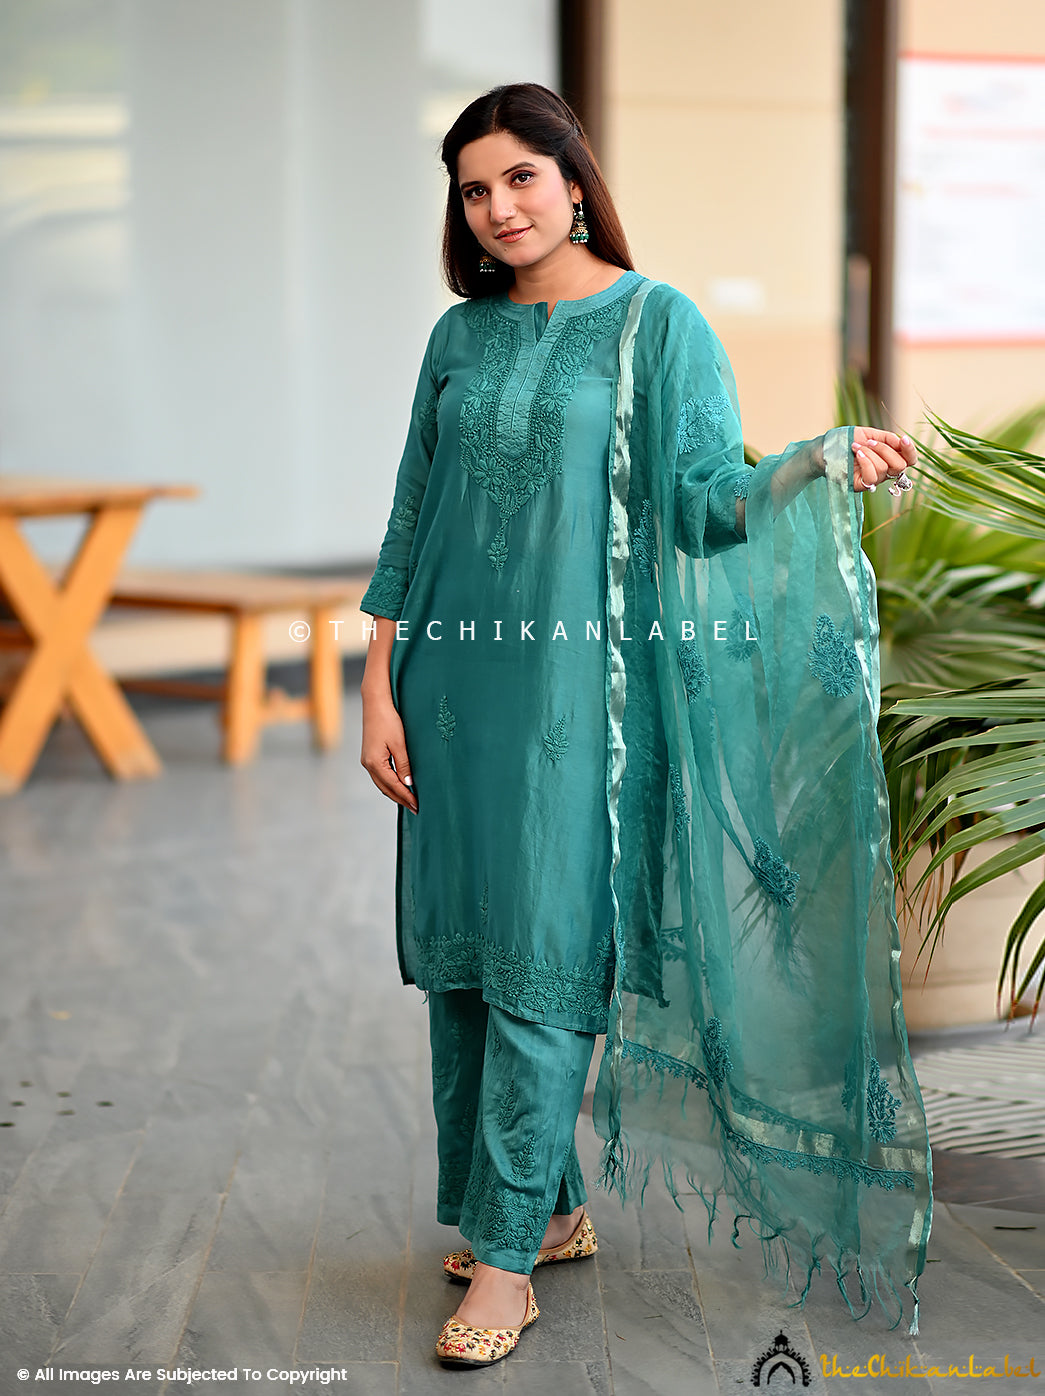 Buy chikankari kurti palazzo dupatta set online at best prices, Shop authentic Lucknow chikankari handmade kurta kurti palazzo dupatta set in chanderi fabric for women 3